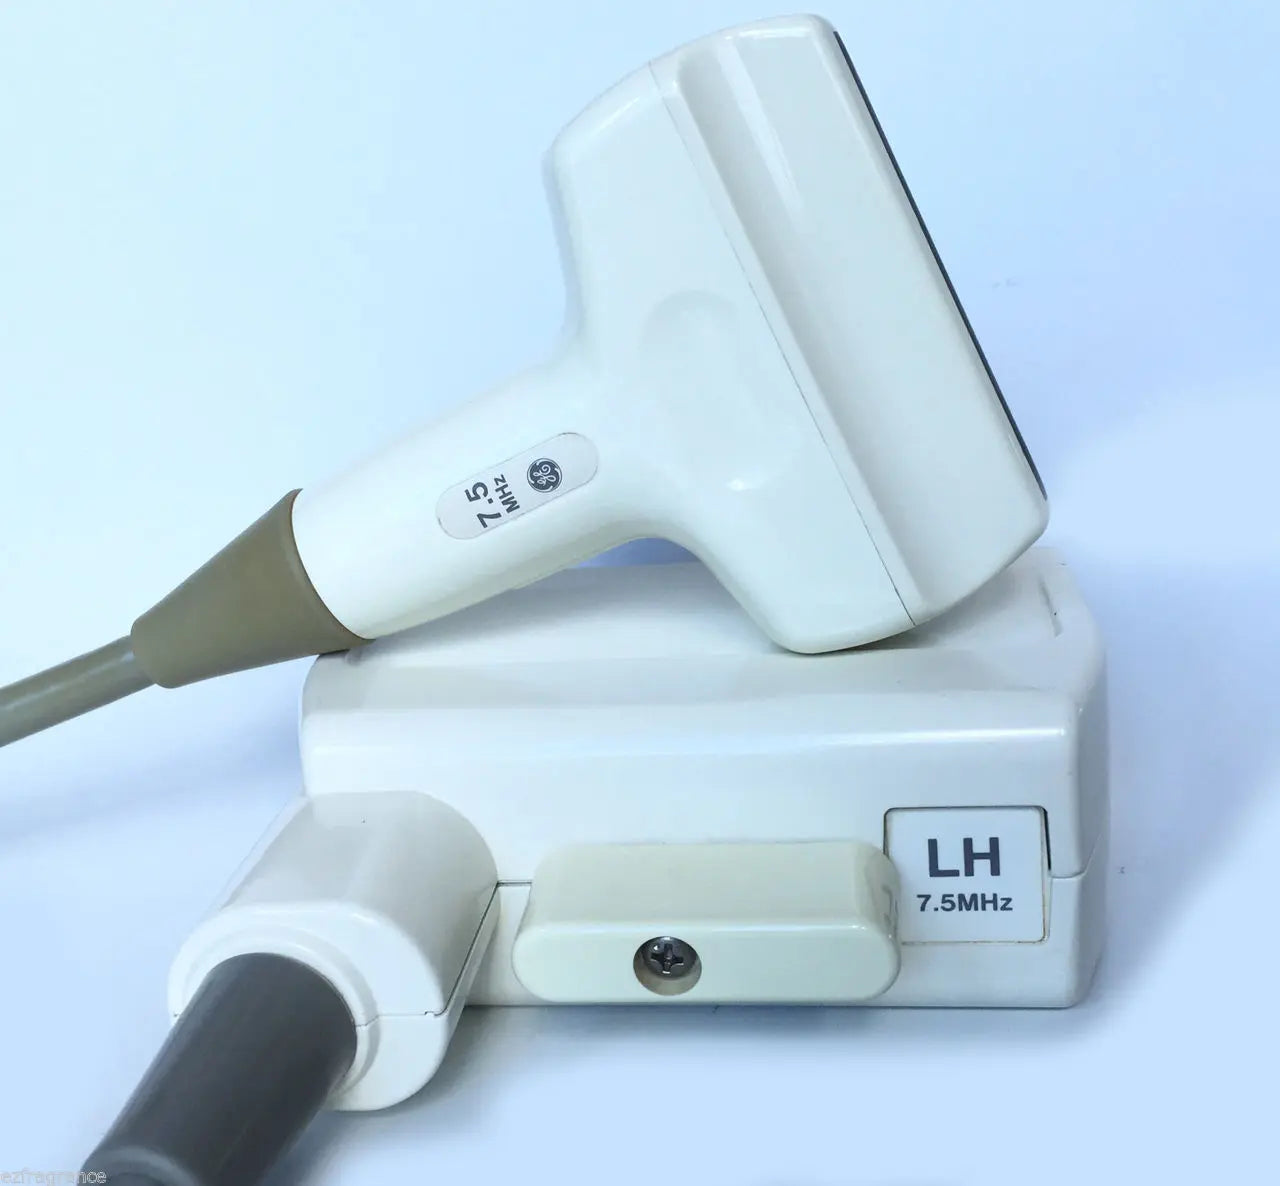 GE LH 7.5Mhz Linear array Ultrasound Transducer for GE Logiq 200/200 Pro USED.